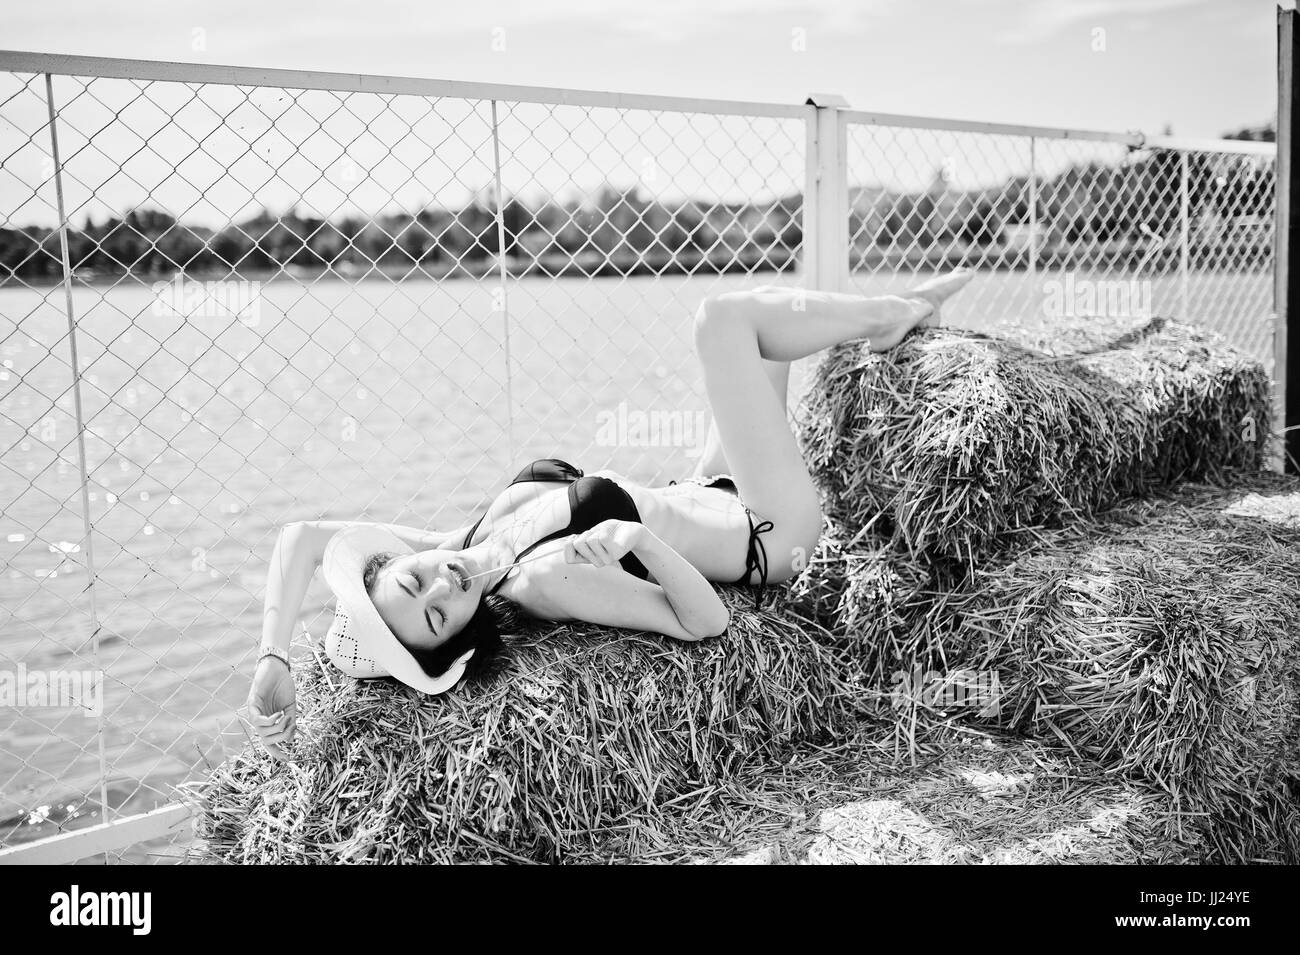 Portrait of a gorgeous girl in black bikini swimsuit posing on the hay bale with a hat by the lake. Black and white photo. Stock Photo